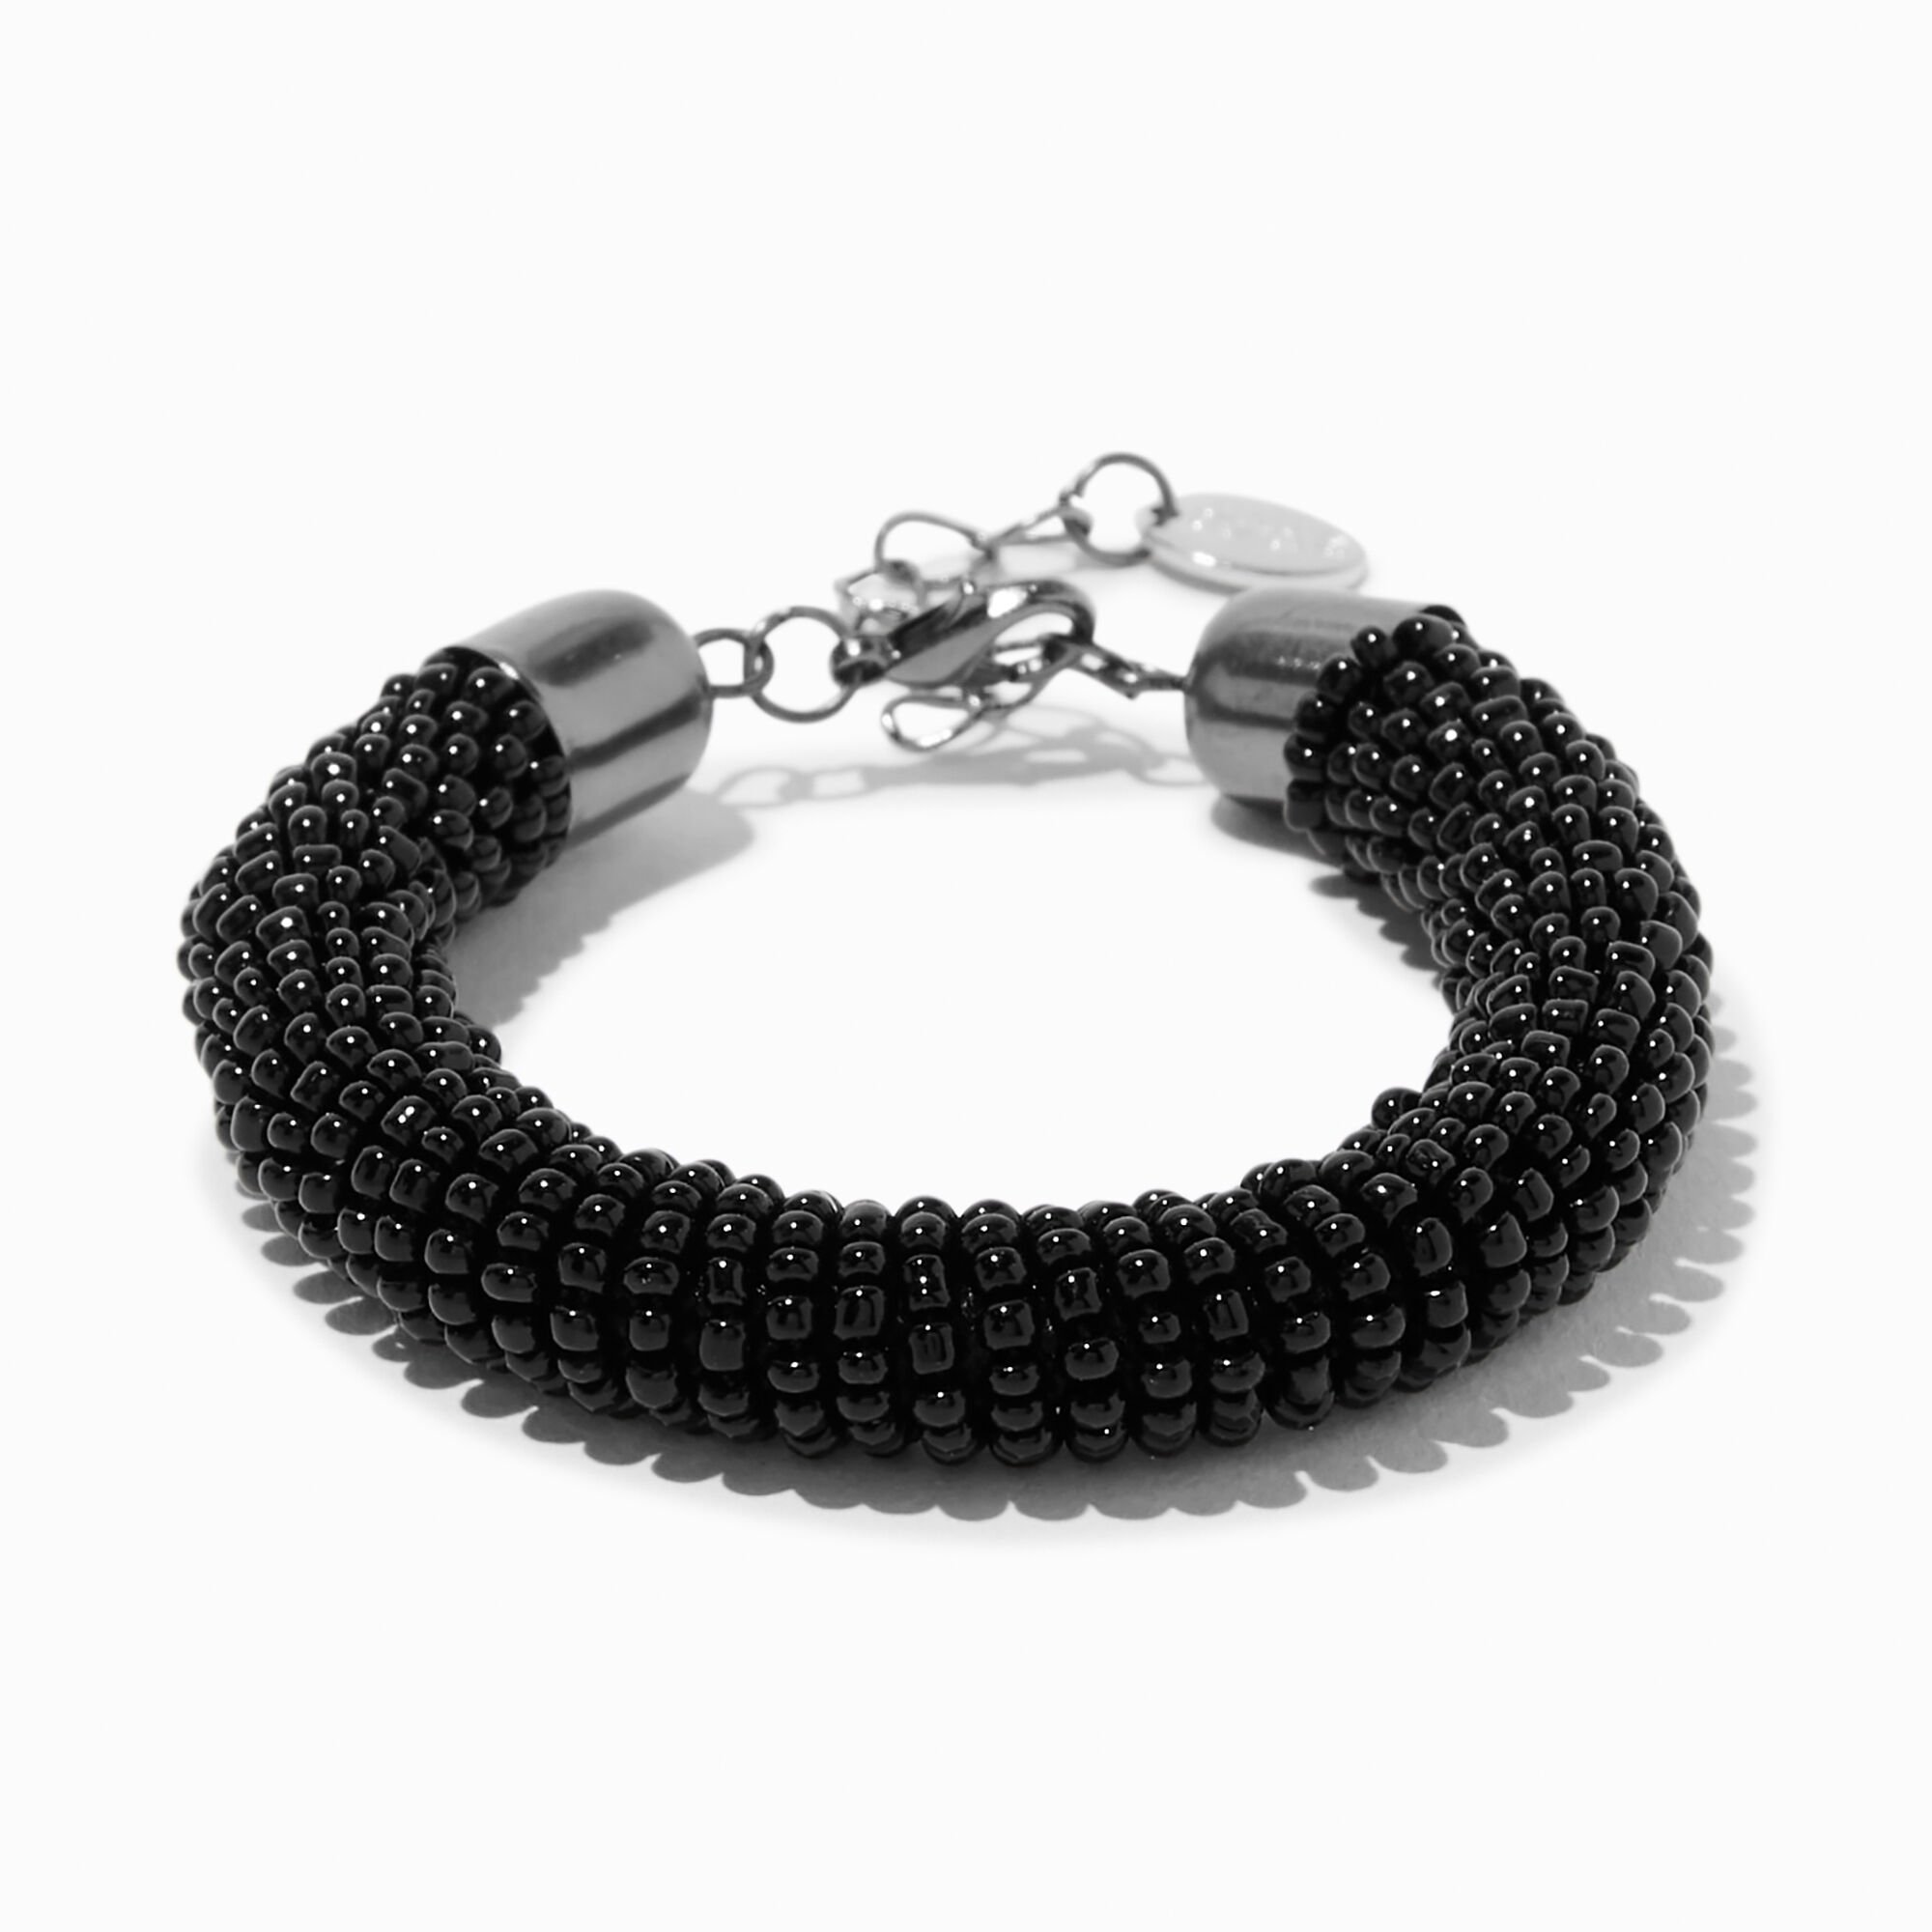 View Claires Seed Bead Crocheted Tube Bracelet Black information